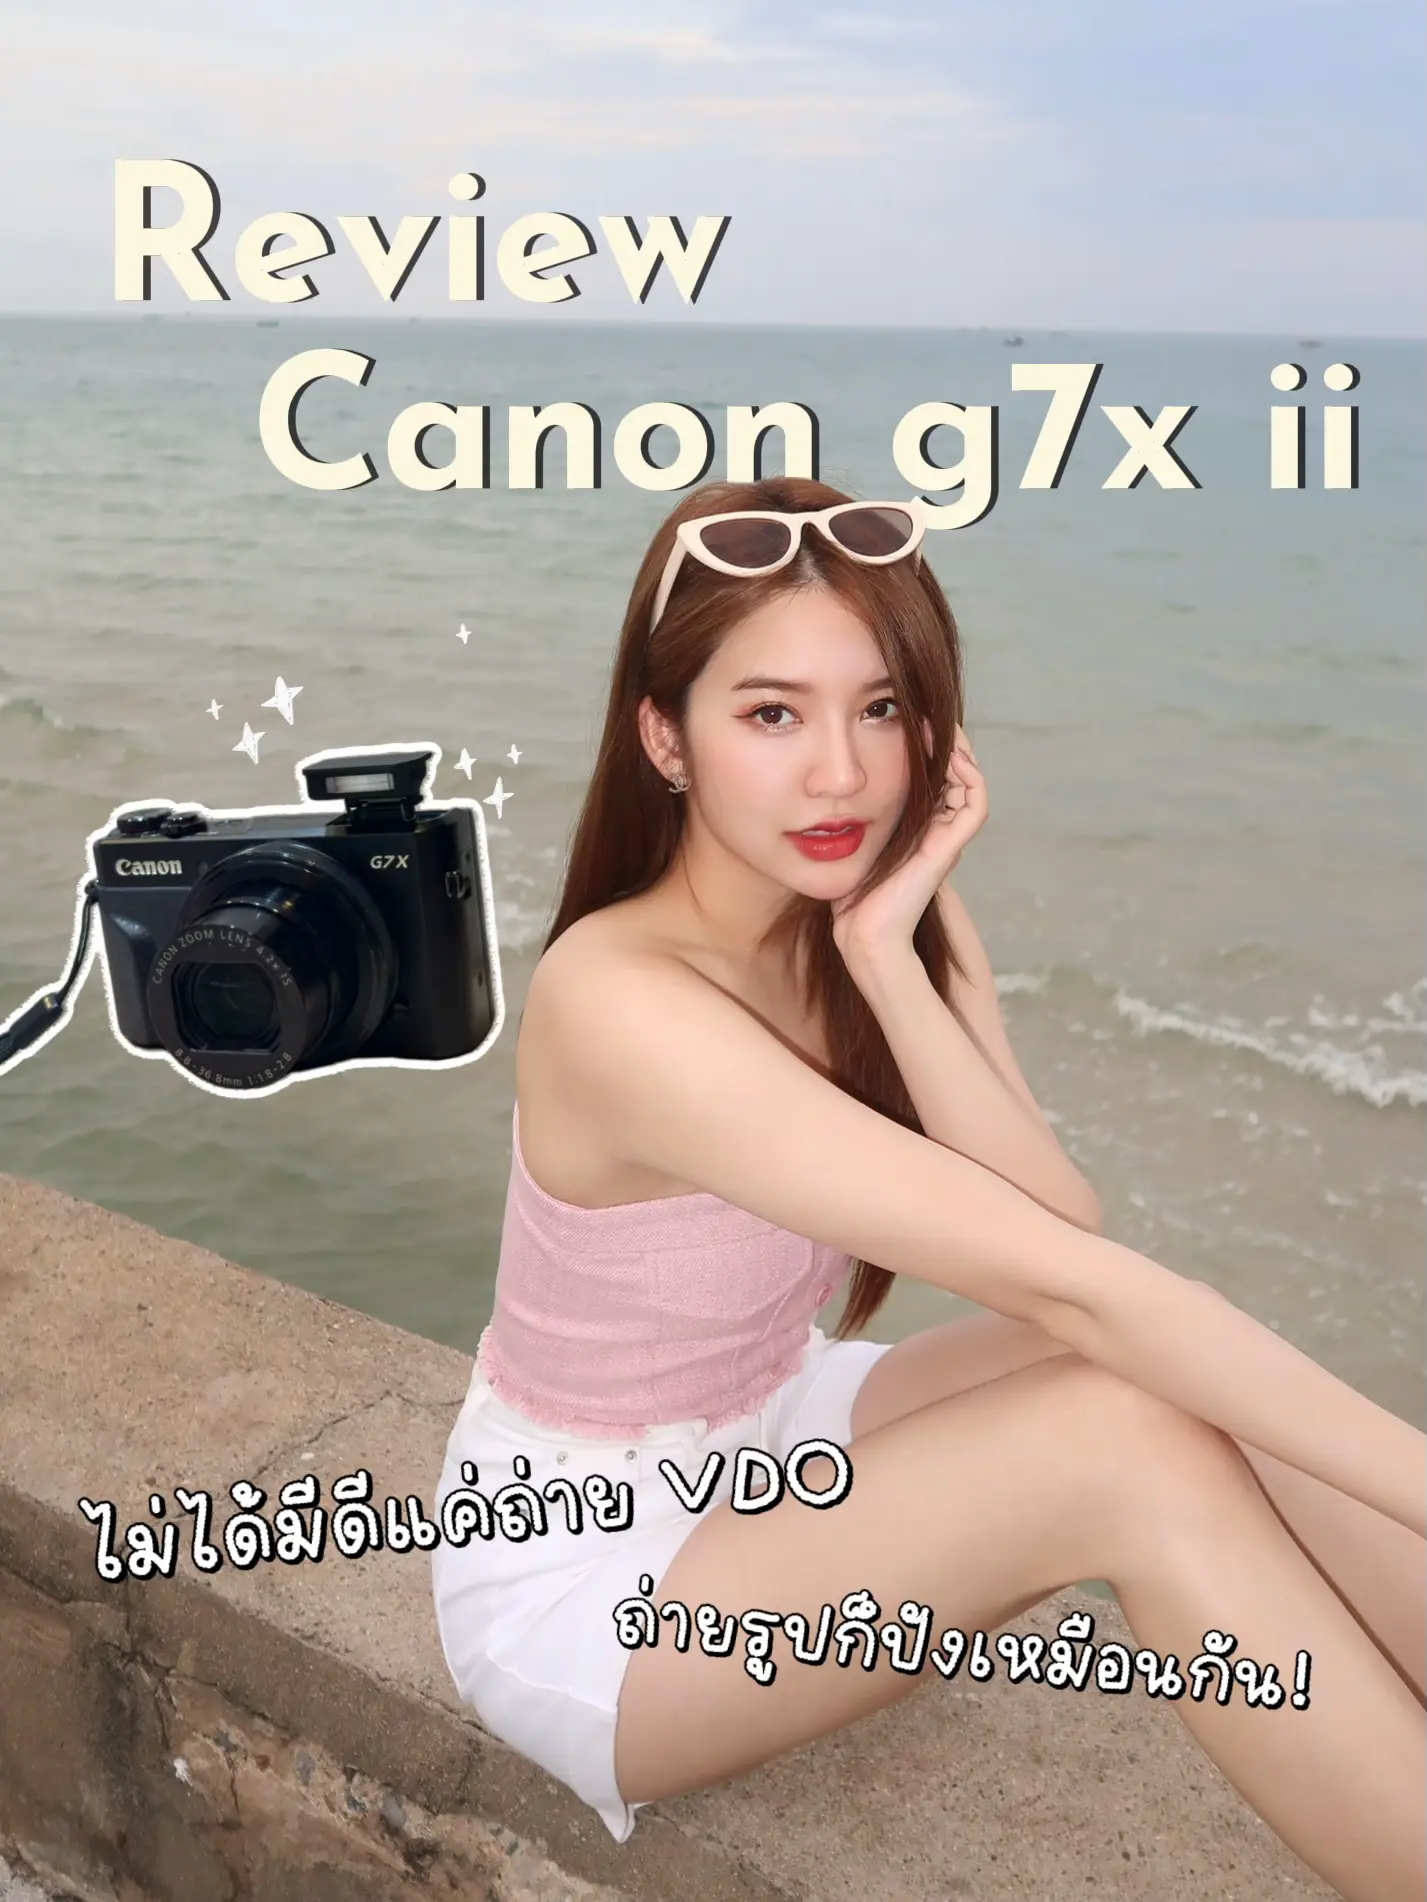 Review Canon g7x ii. Take a picture is bang. 📸